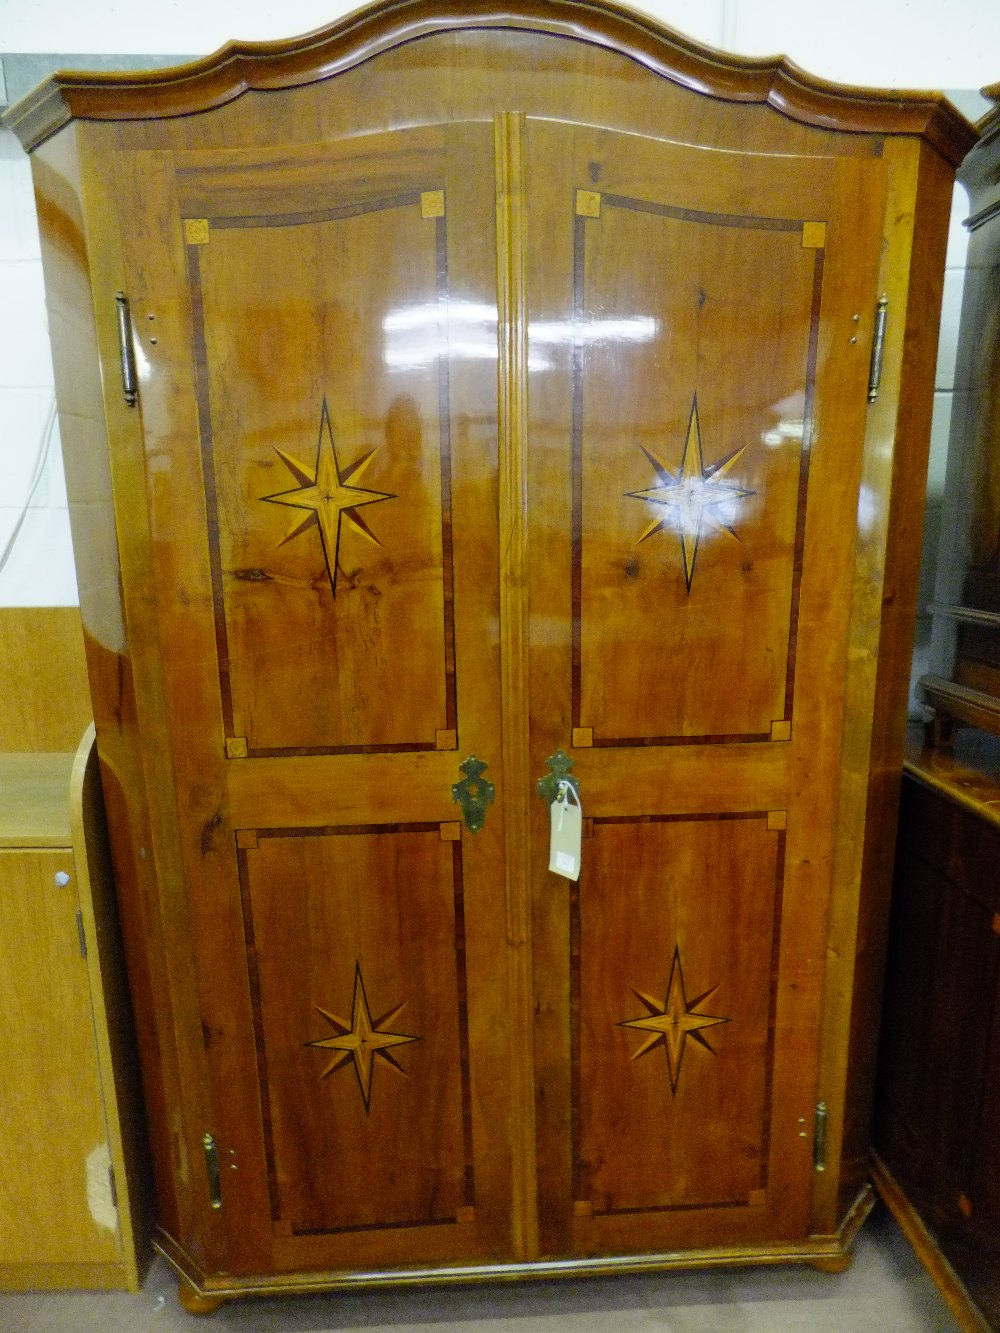 An early 19th century pentagonal wardrobe the softwood carcass inlaid with geometrical design the